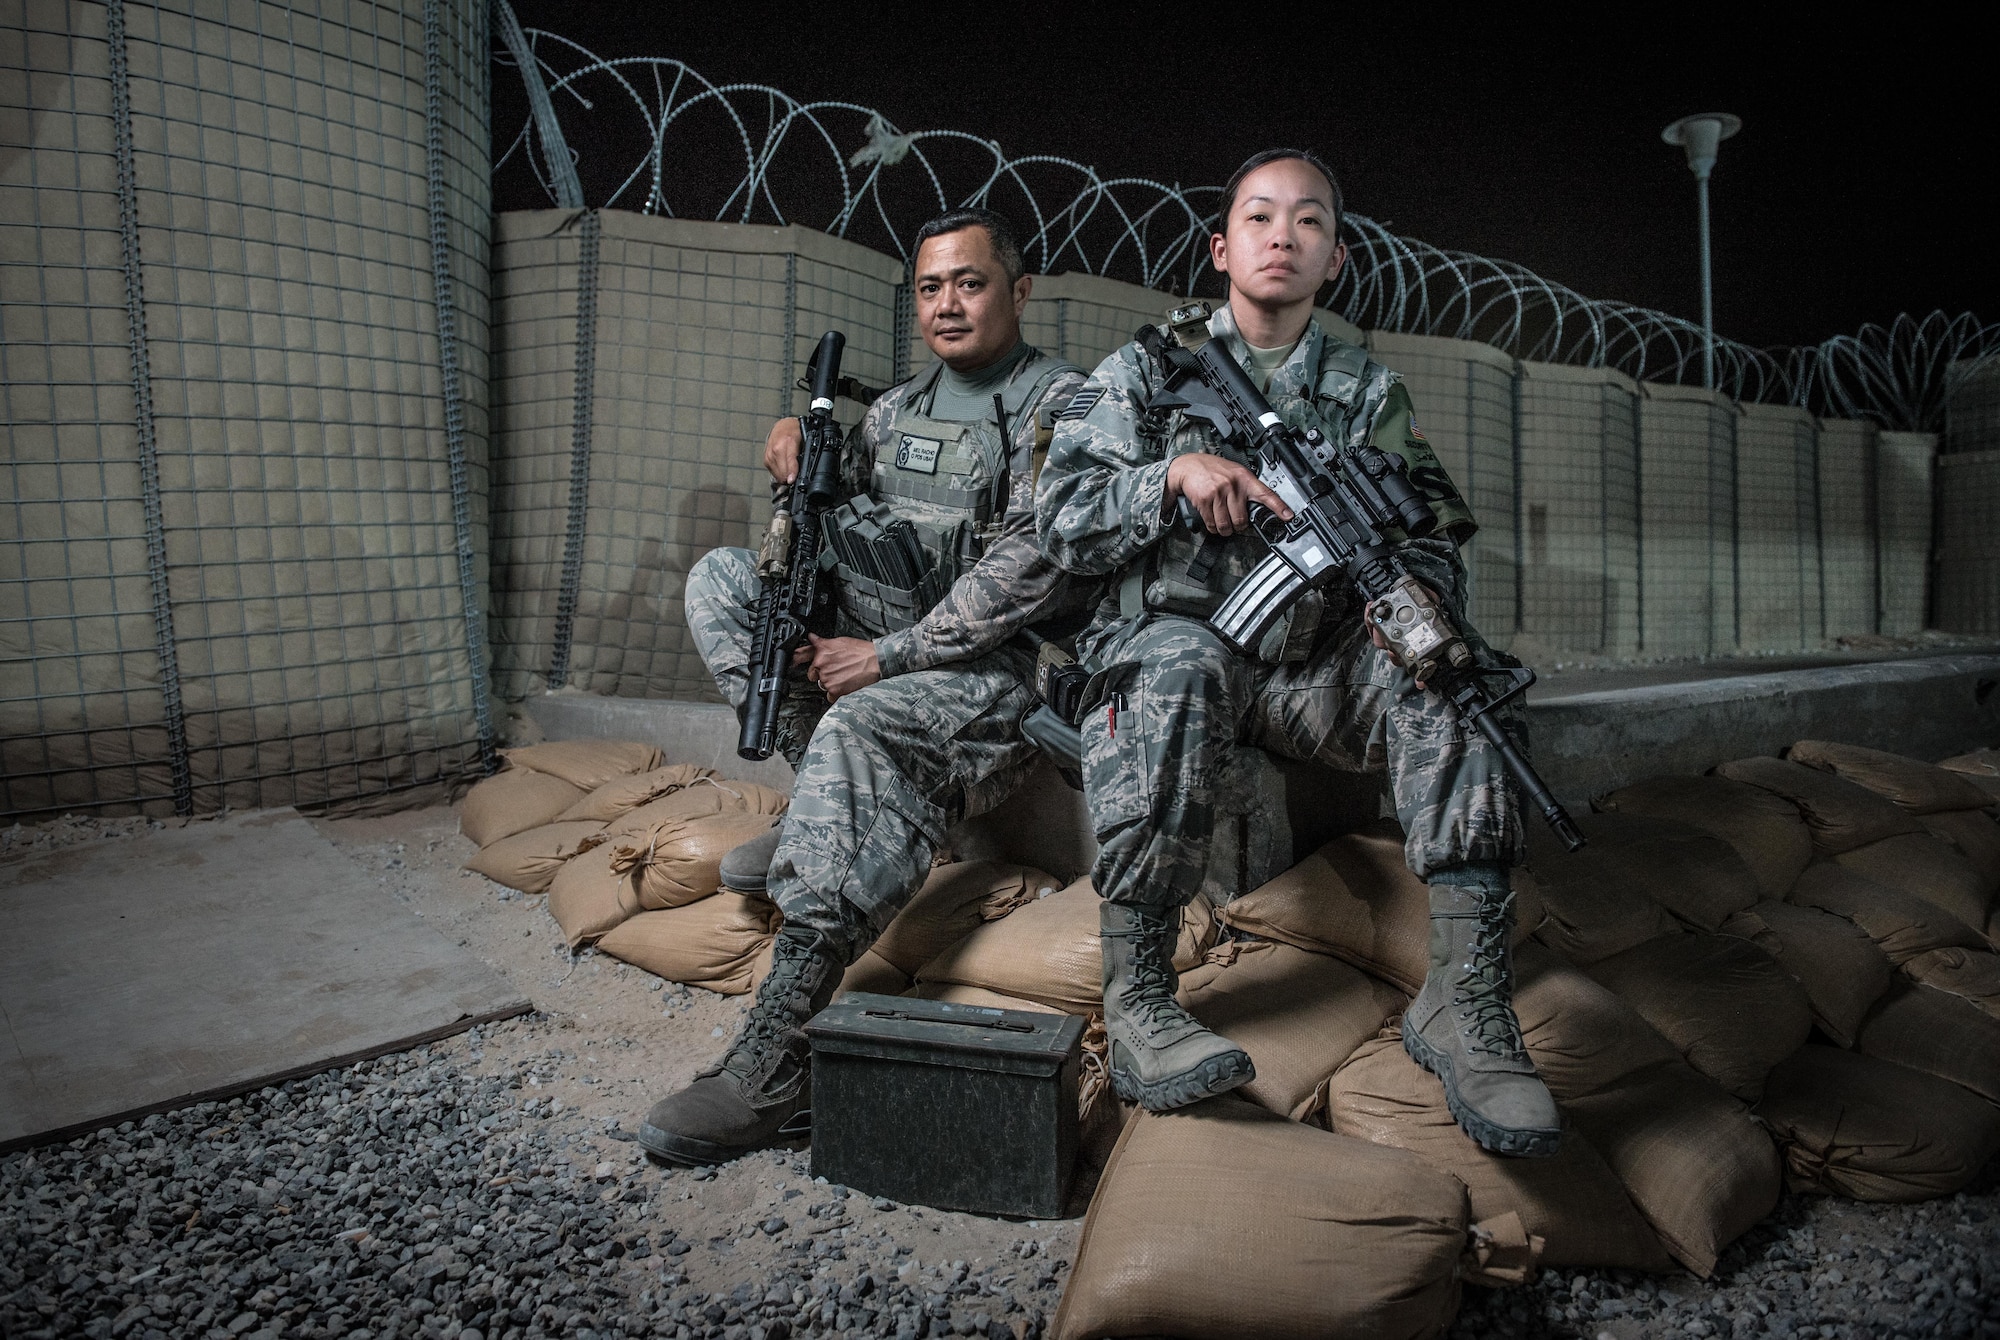 U.S. Air National Guard Staff Sgt. Melquiadez Racho, left, and Tech. Sgt. Renada Taitingfong, both security forces team leads with the 407th Expeditionary Security forces Squadron, sit for a photo May 13, 2017, in Southwest Asia. Racho and Taitingong are guardsmen deployed from the 254th Security Forces Squadron at Andersen Air Force Base, Guam. As part of integrated base defense, the Airmen perform perimeter patrols, vehicle search and personnel screening duties in support of coalition operations against ISIS. (U.S. Air Force photo by Staff Sgt. Alexander W. Riedel)